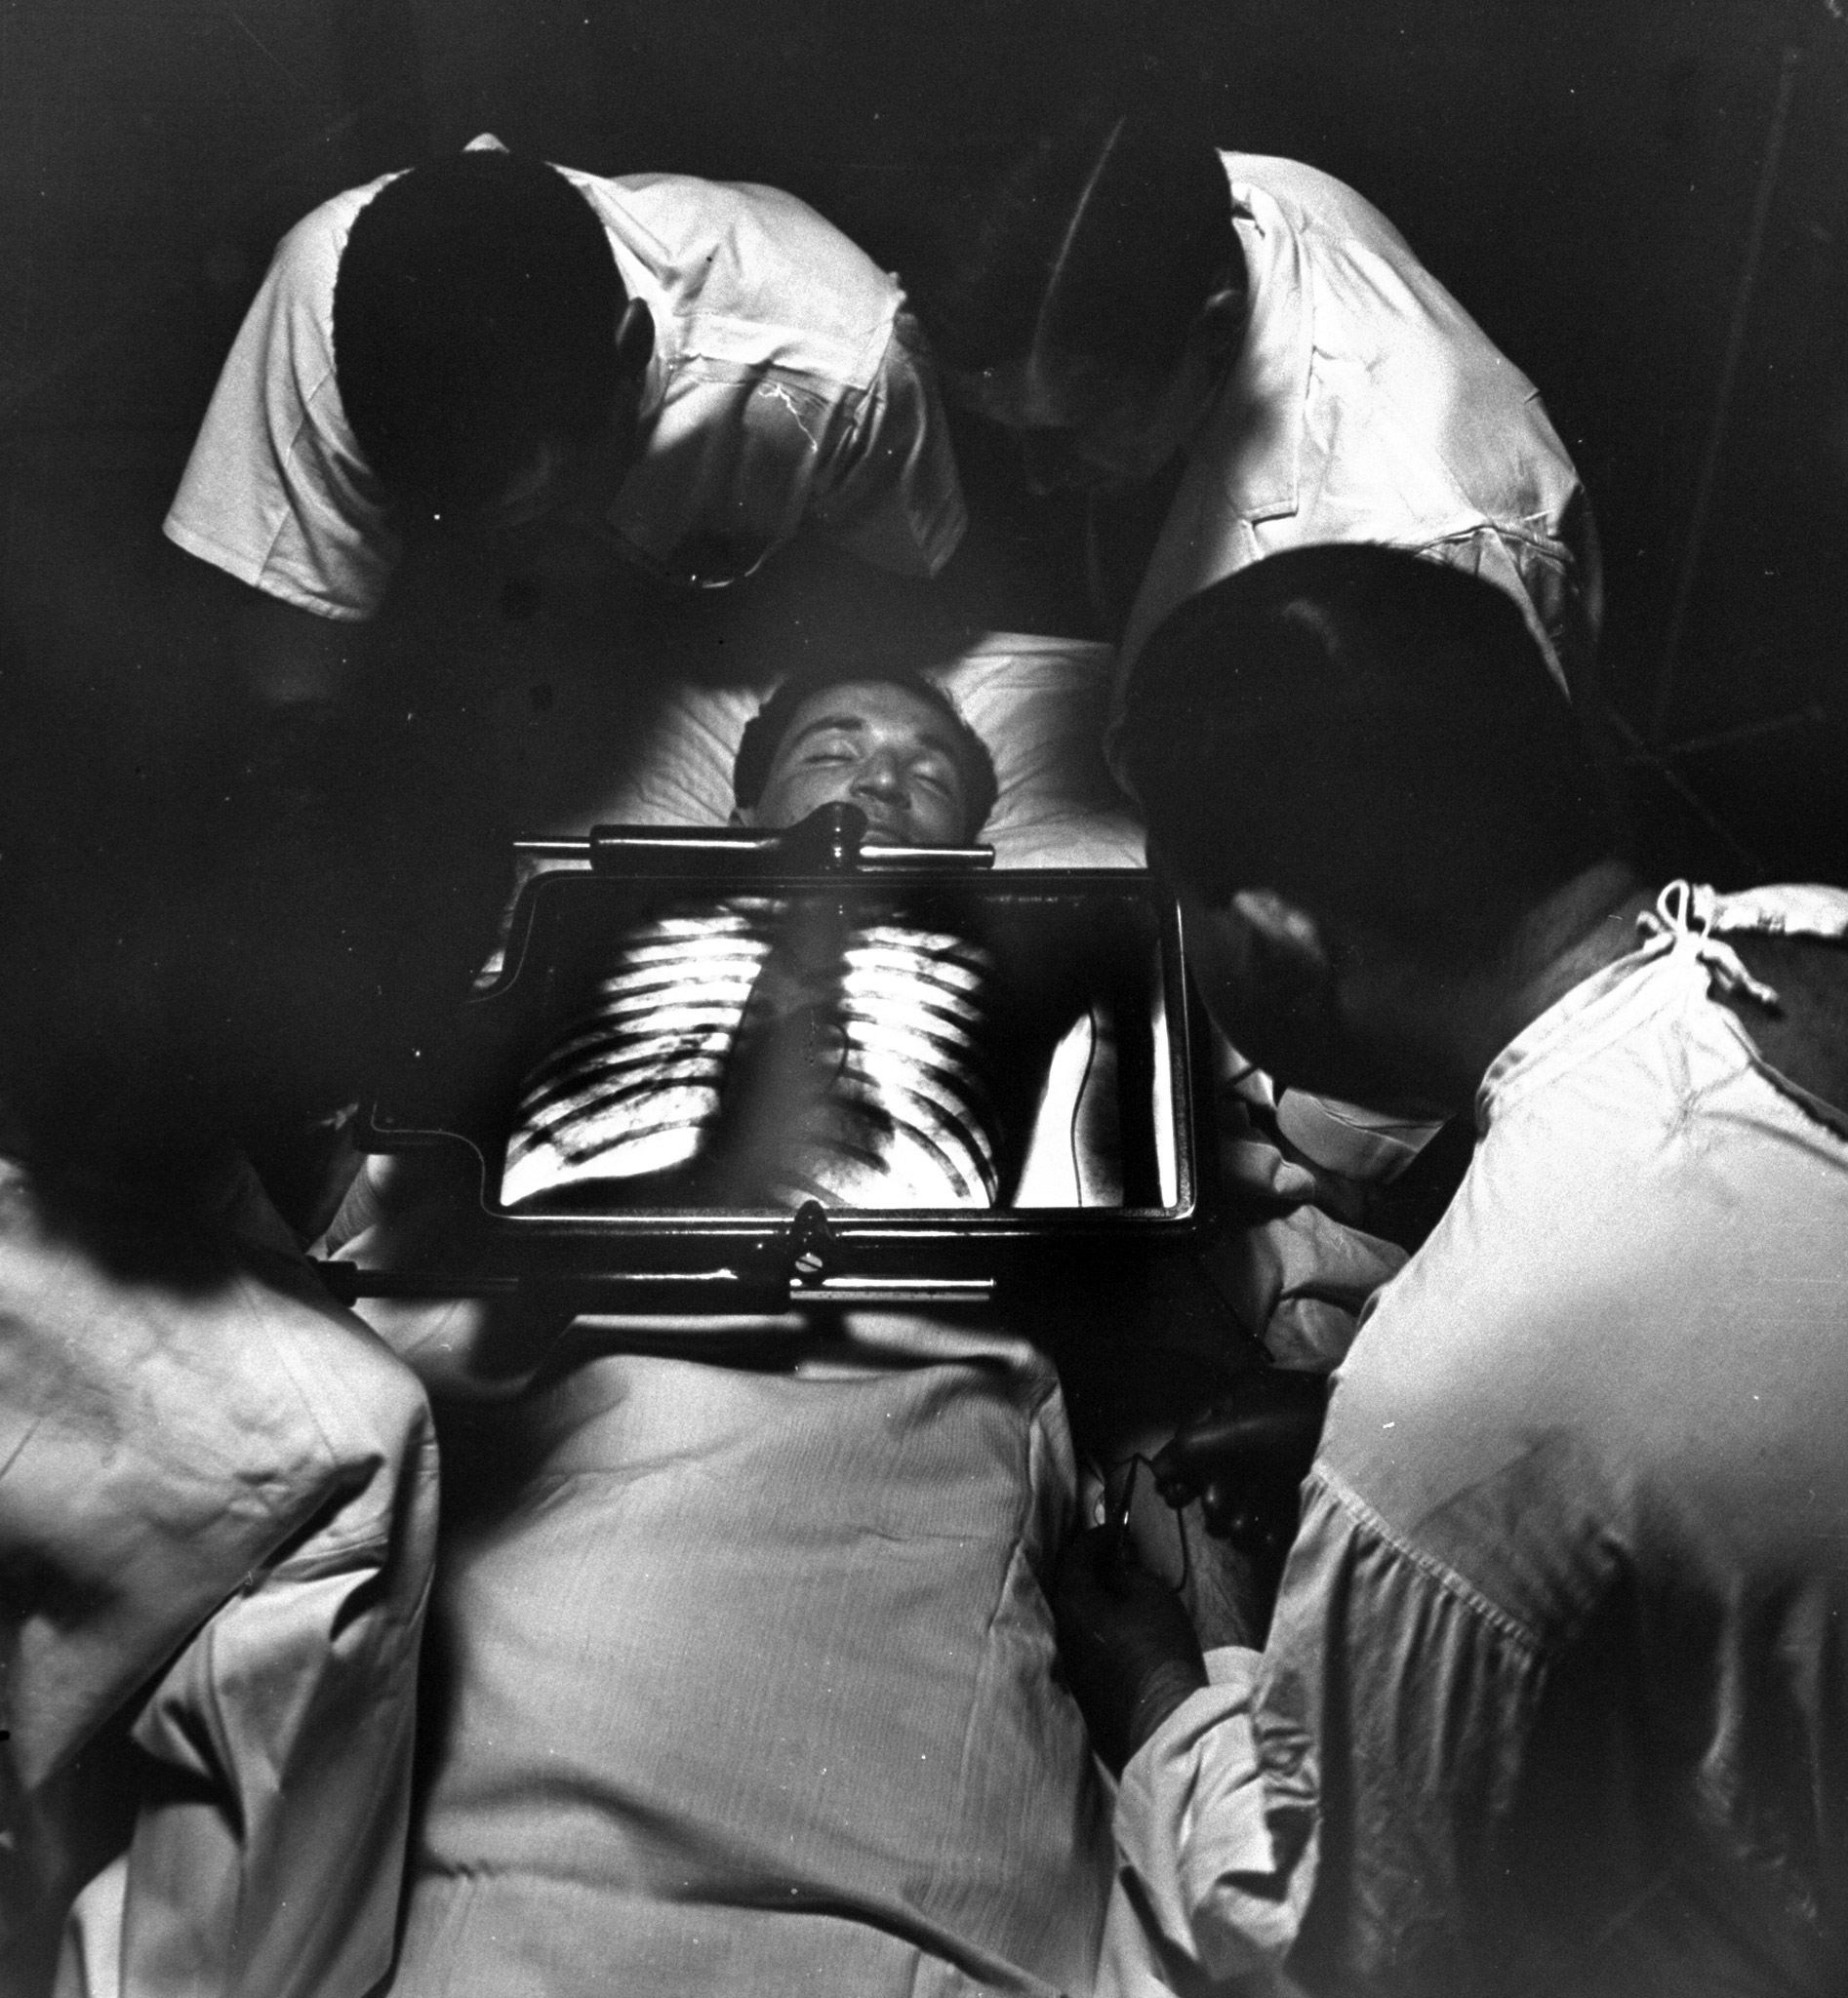 Doctors using x-ray machine to feed venous catherter into patient's heart, 1947.